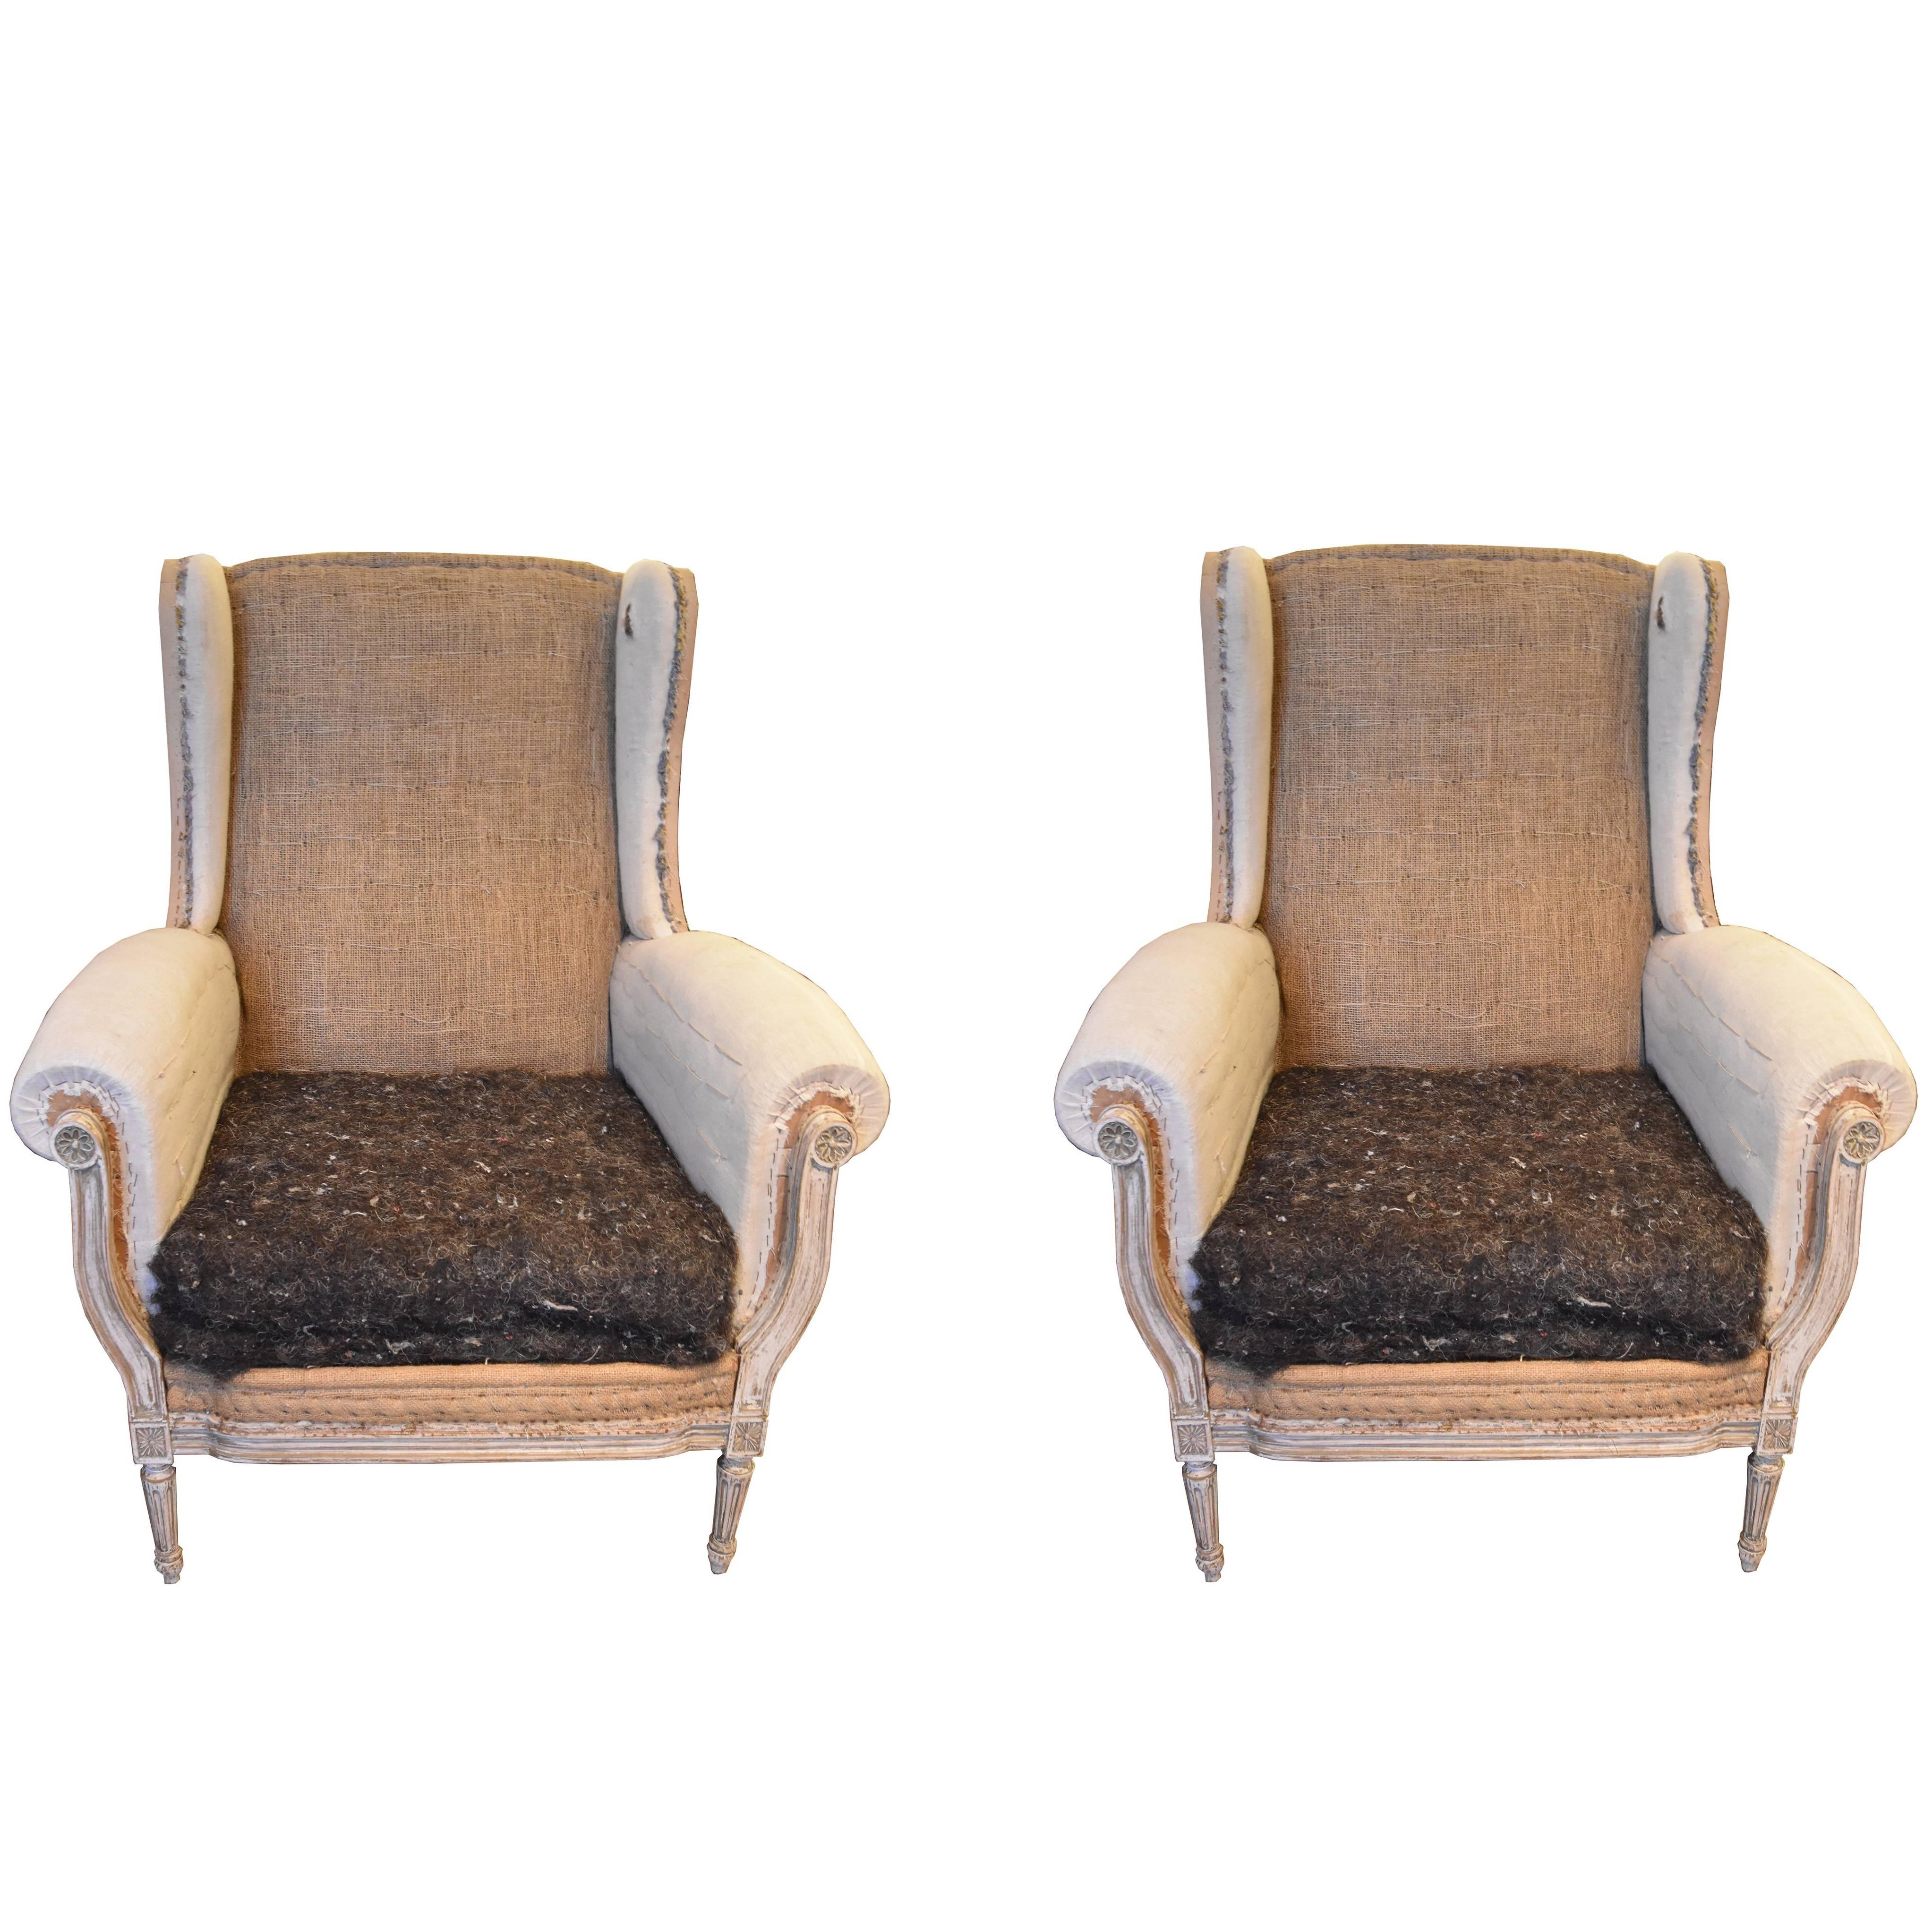 Pair of 19th Century Louis XVI Style Wingback Chairs